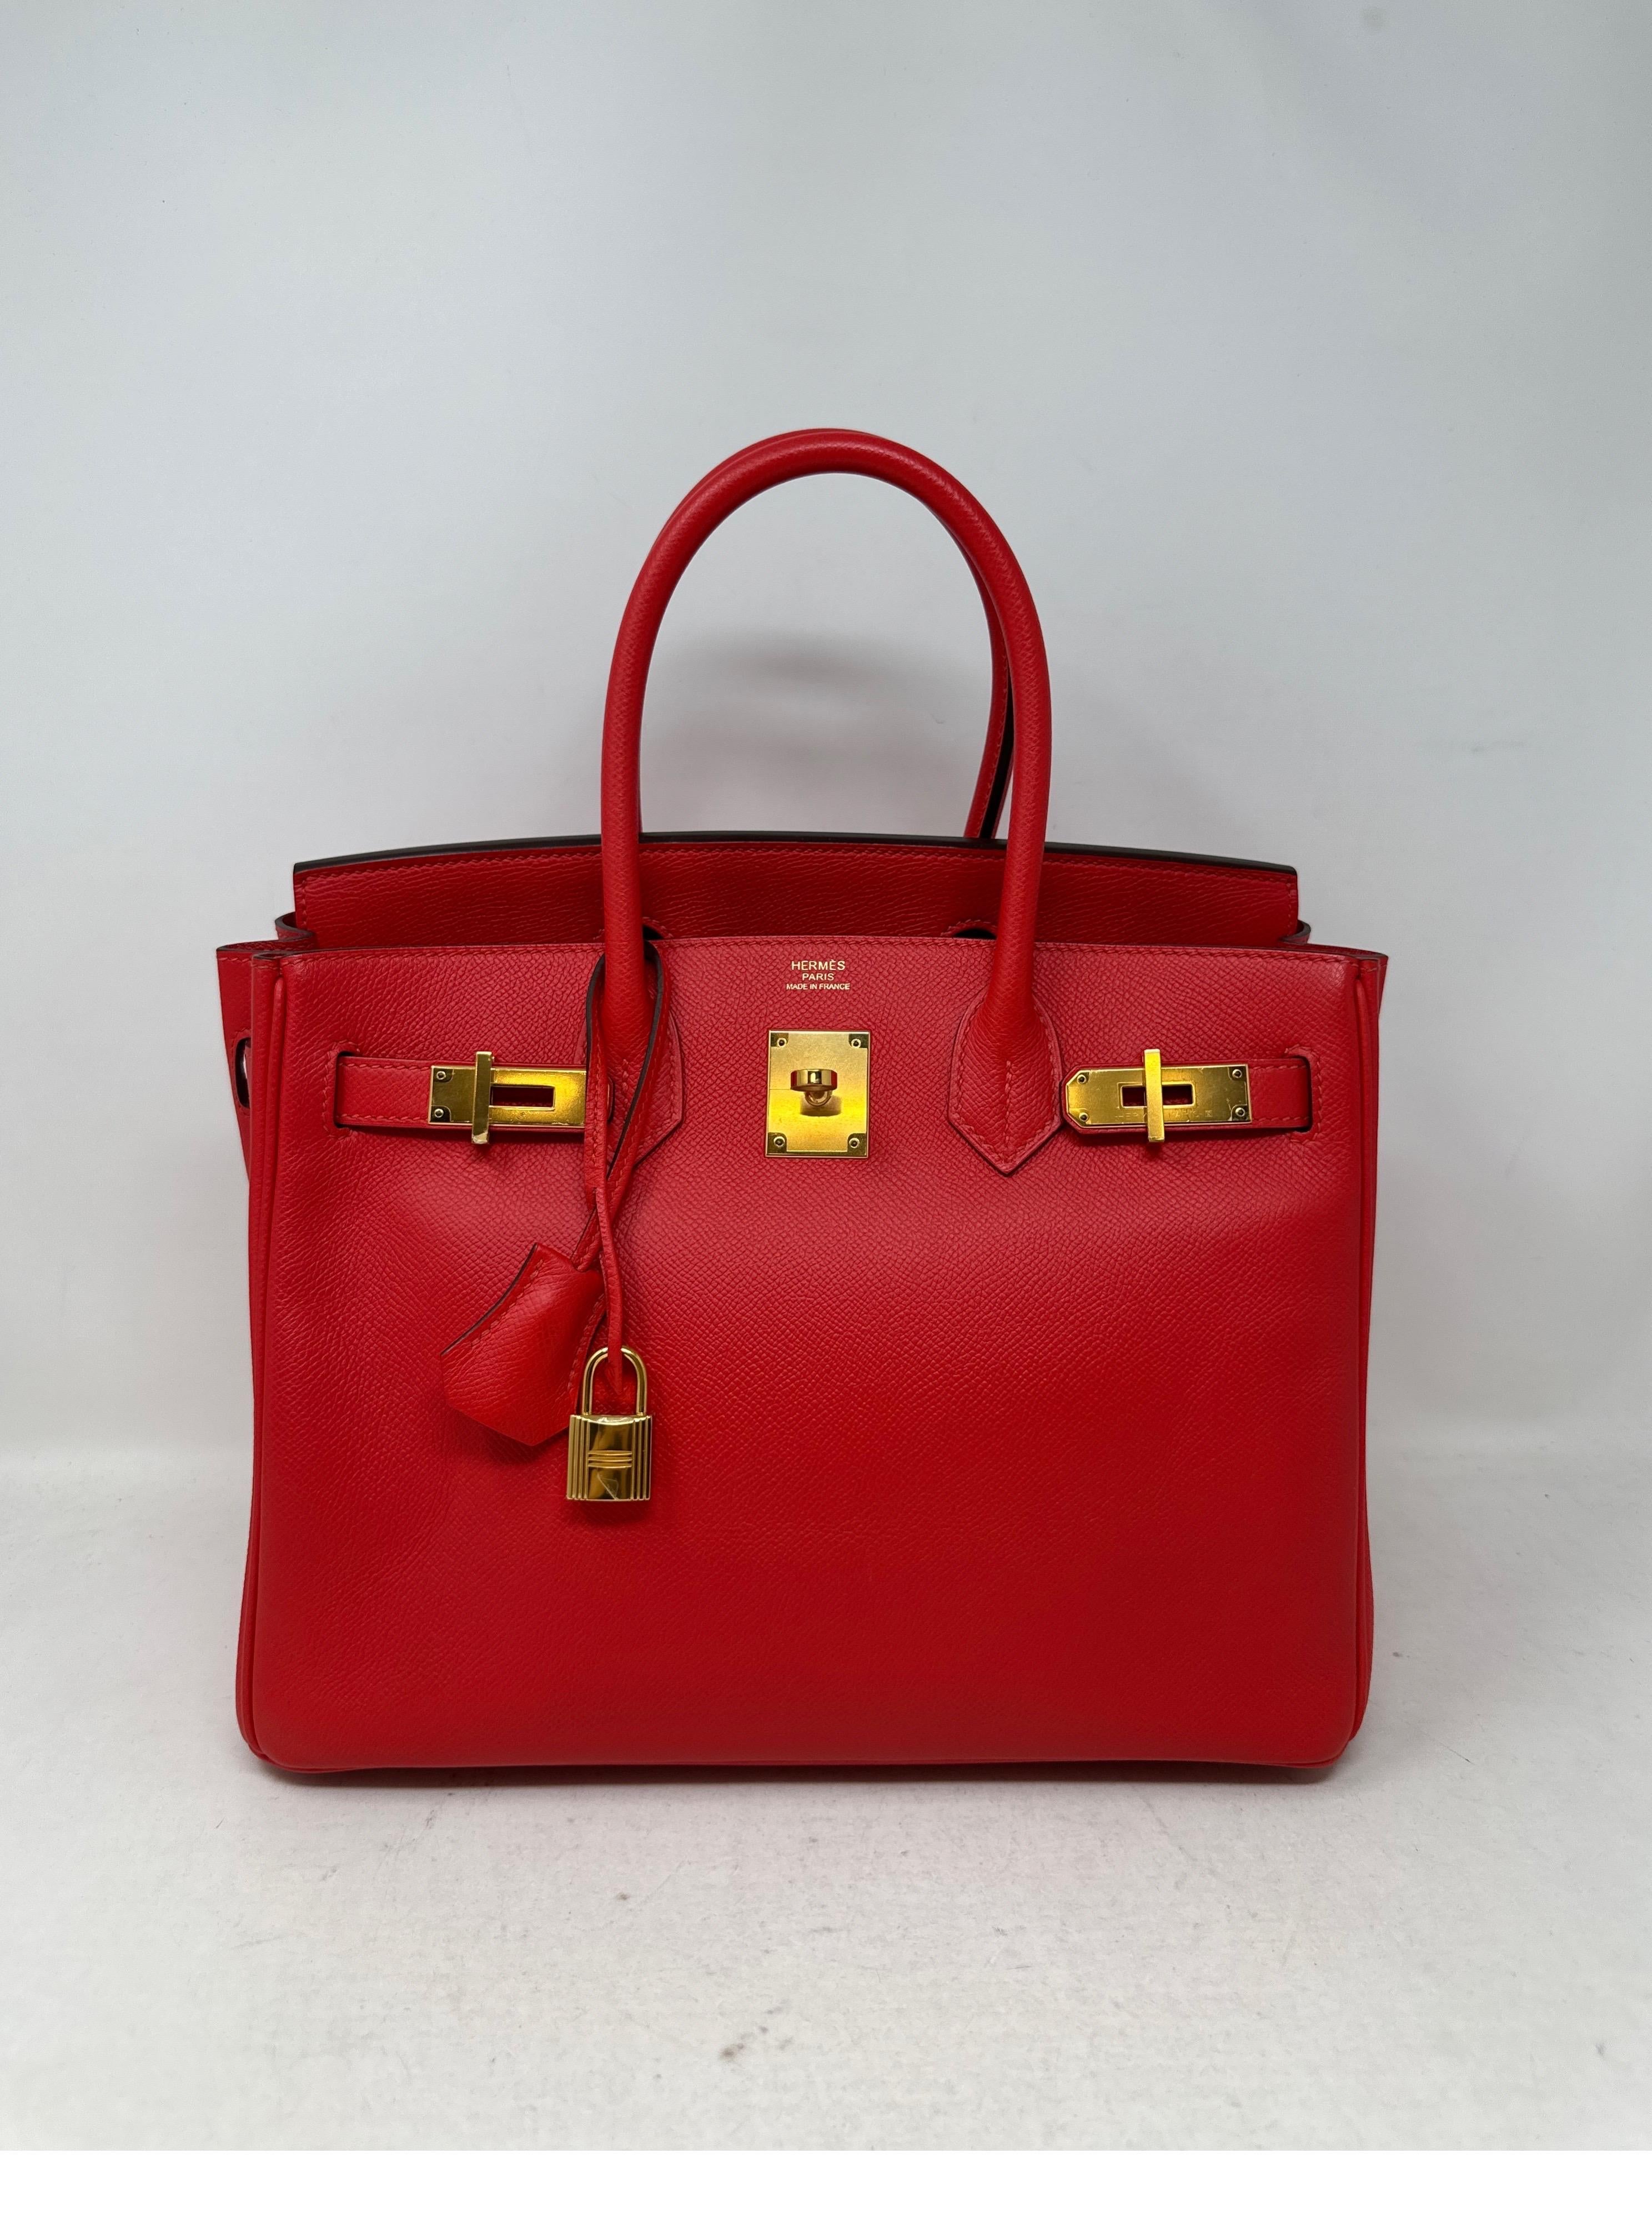 Hermes Rouge Tomate Birkin 30 Bag  In Excellent Condition For Sale In Athens, GA